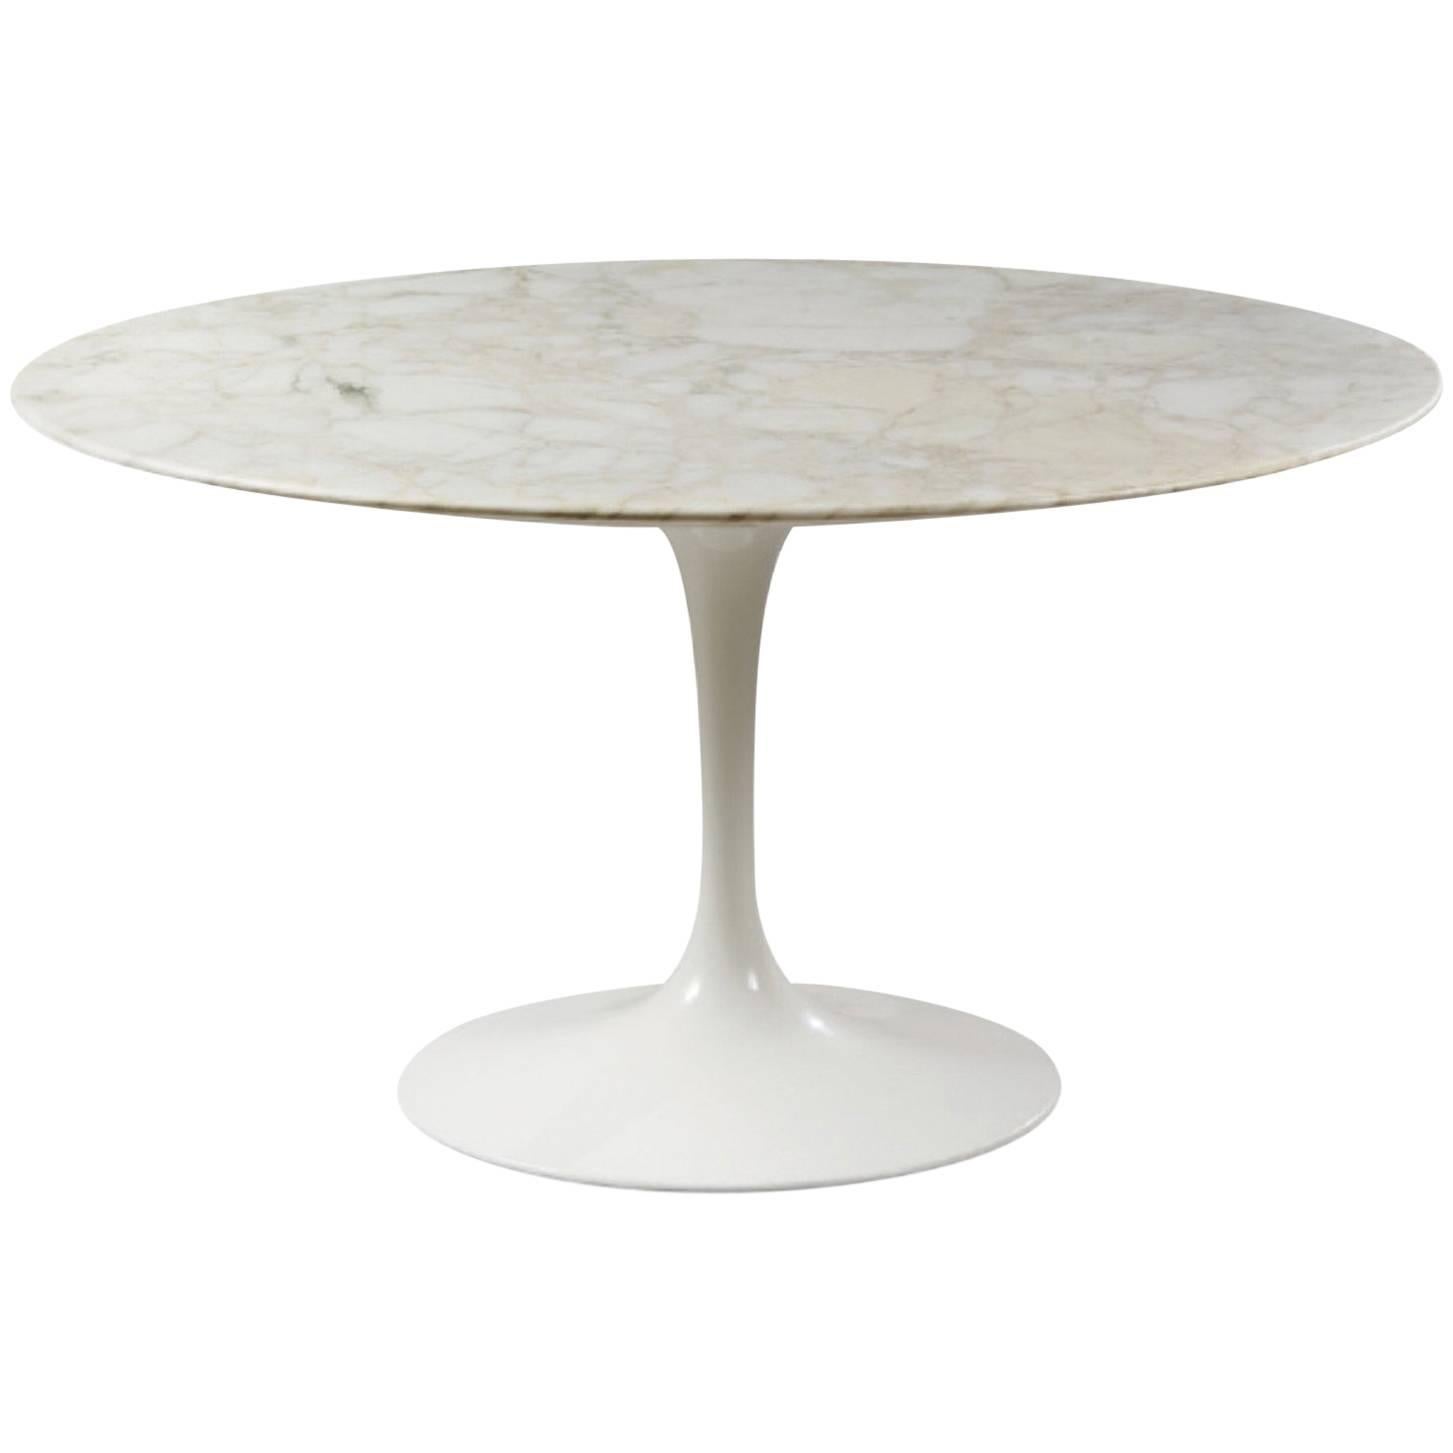 Eero Saarinen (1910-1961) and Knoll International
Tulip, modèle created, 1956.
Round table, Rilsan sheathed cast aluminium base
Circular white marble-top chamfered on the underside of its perimeter
Table ronde, piètement en fonte d'aluminium